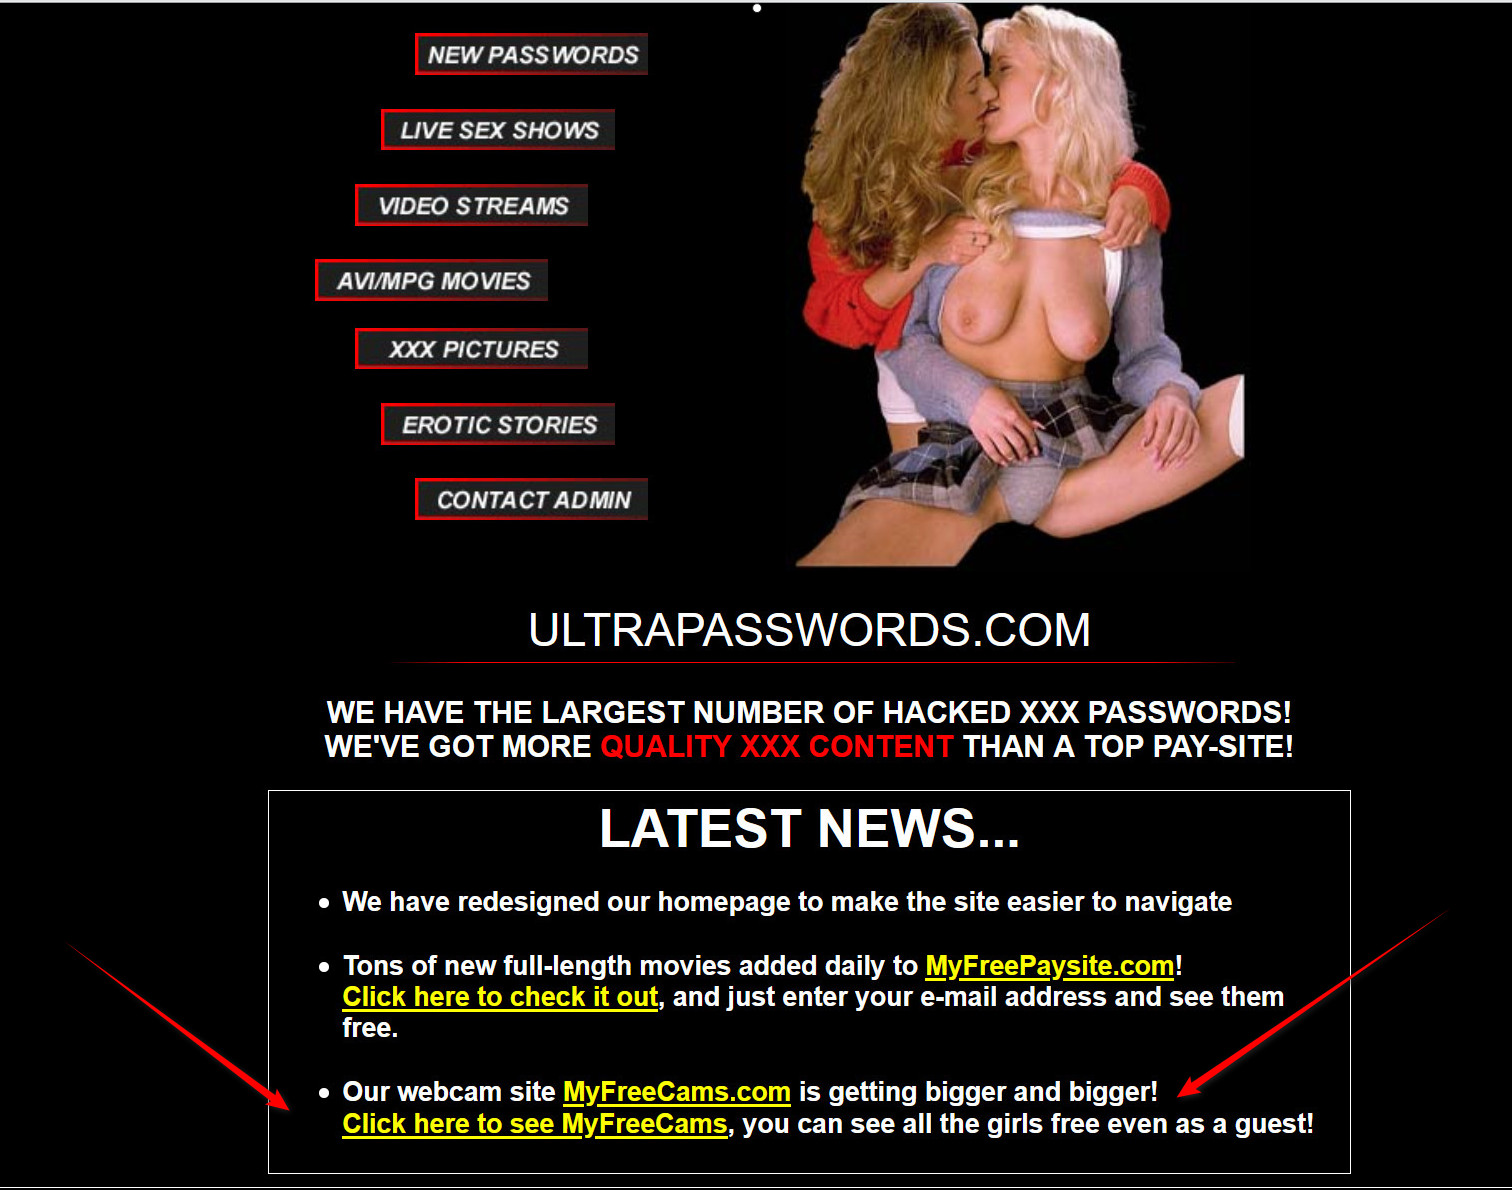 Whim on X: Archived website ultrapasswords referred to in the article by  @forensicnews allegedly owned by Leo Radvinsky, owner of MyfreeCams and  OnlyFans seemingly selling stolen passwords. 1 of 4  t.co4tThn7i1Hw 